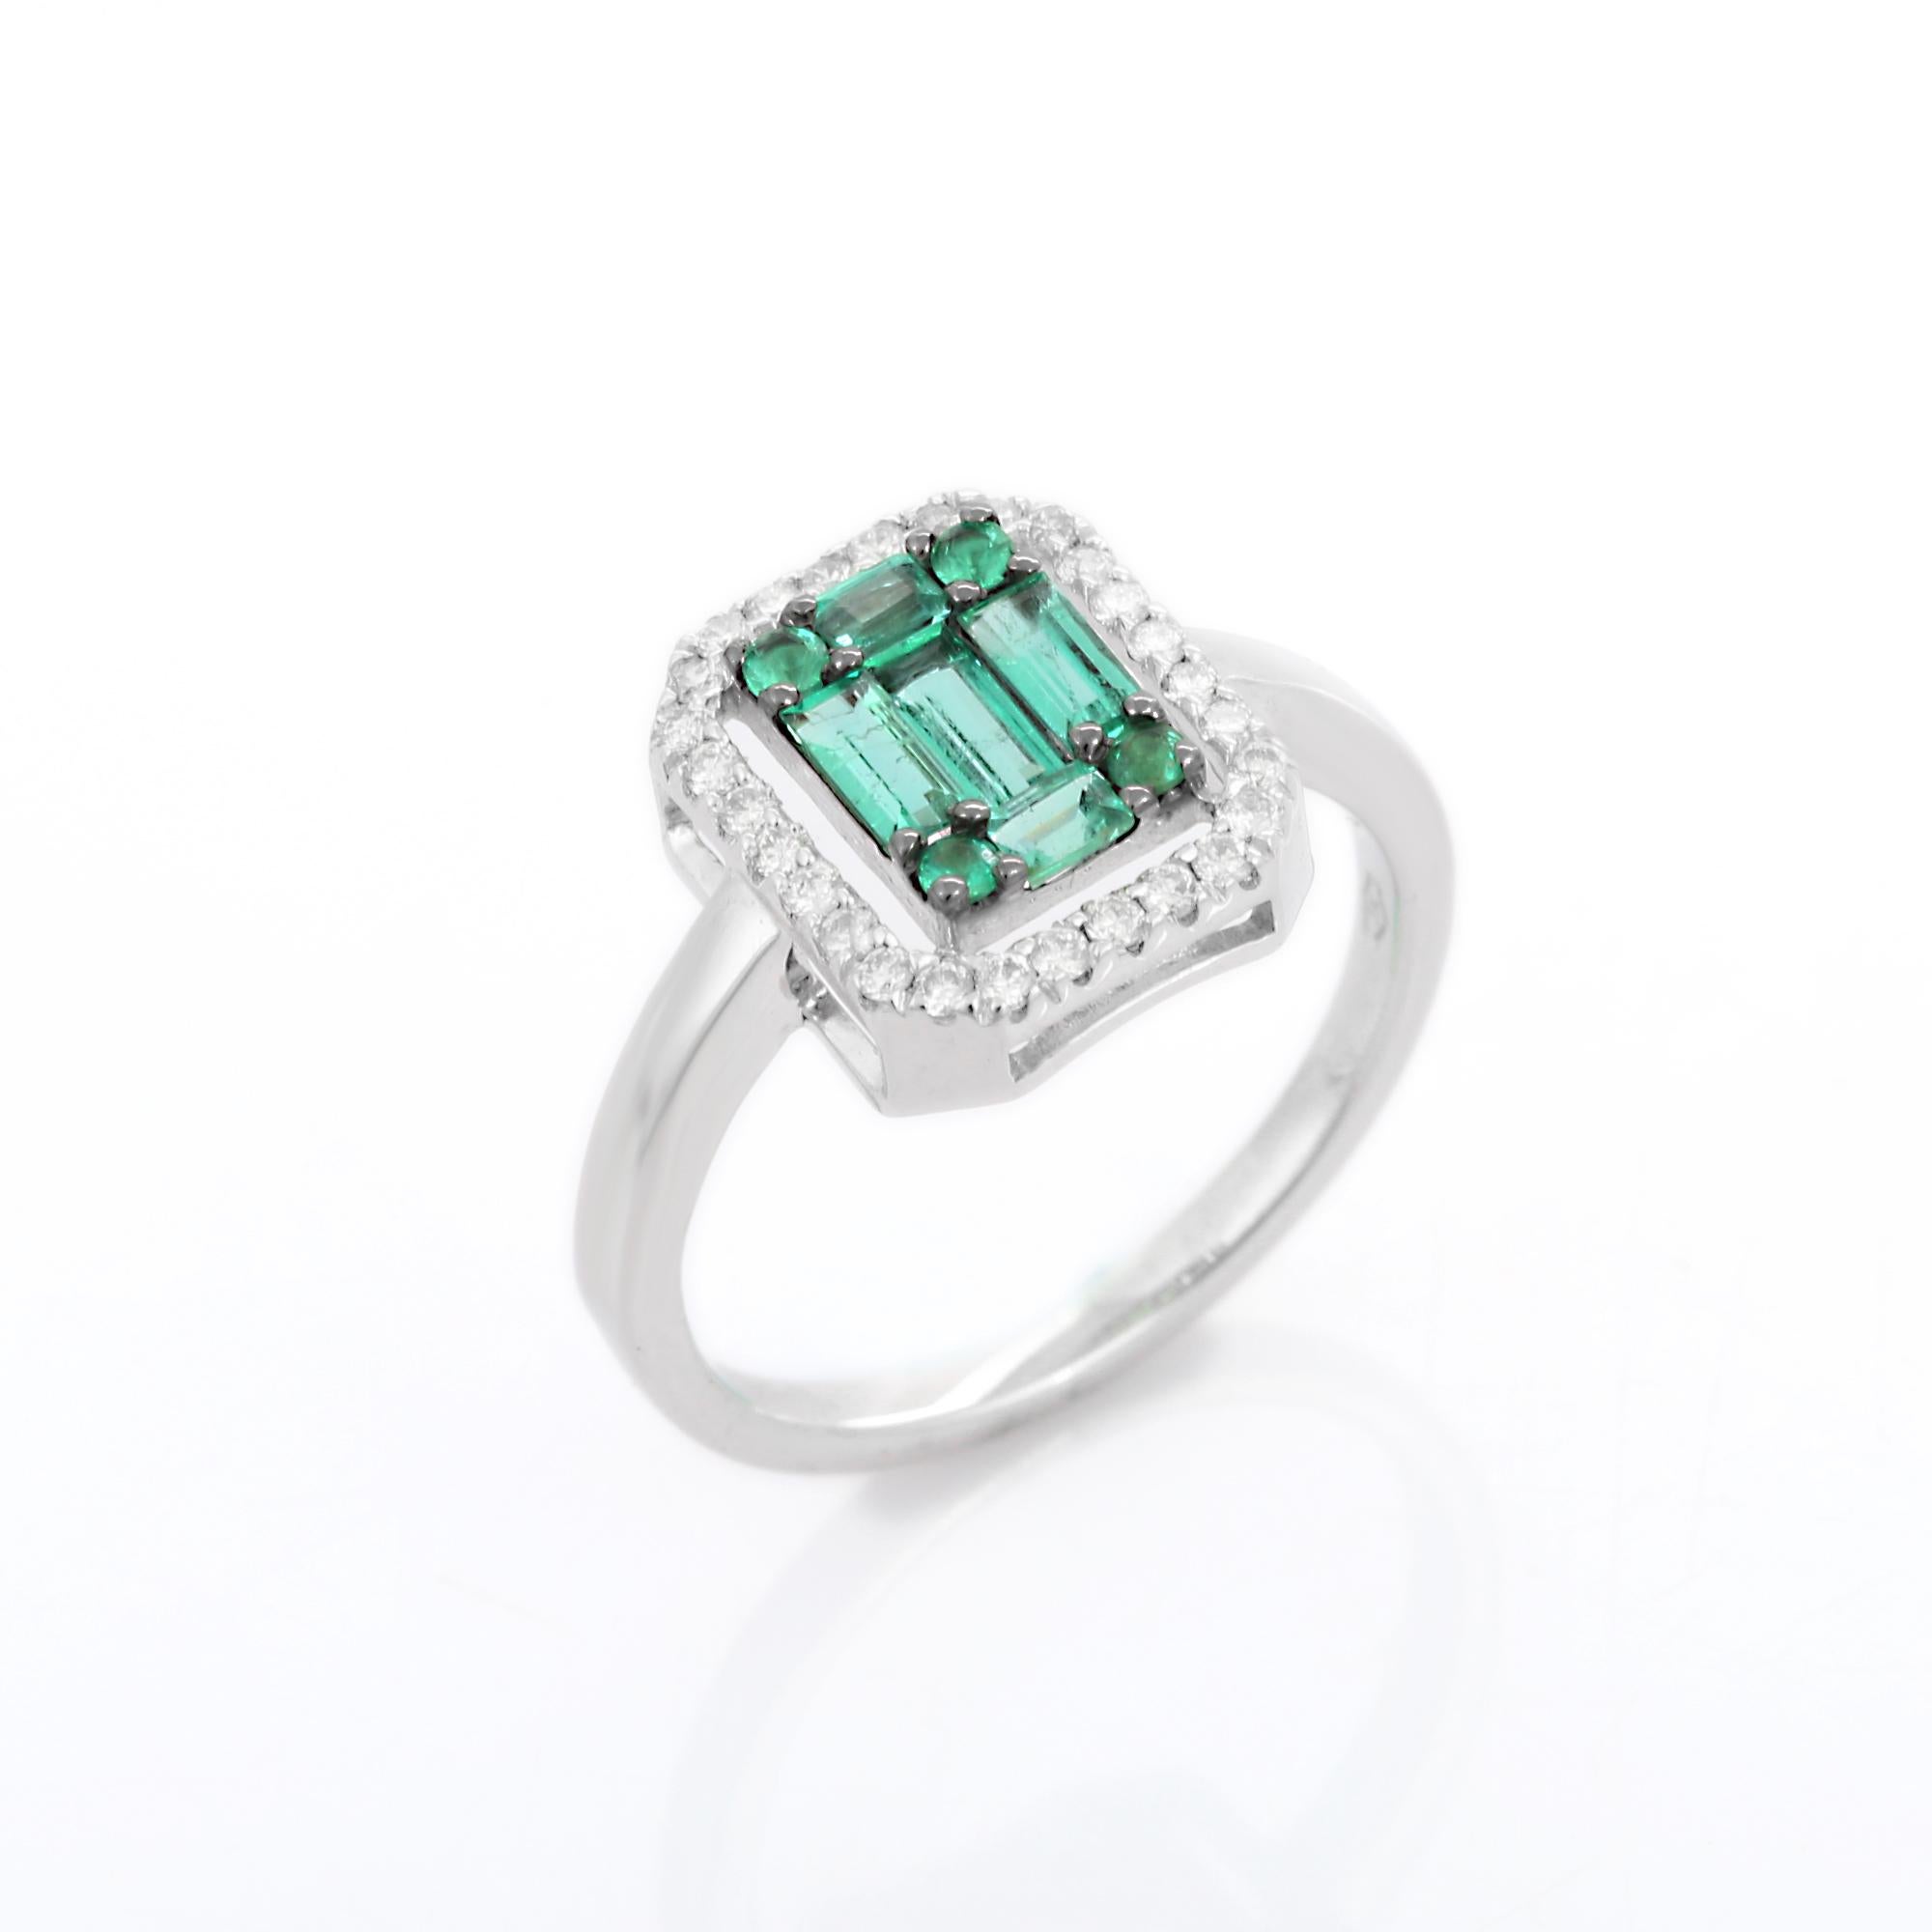 For Sale:  18k Solid White Gold Emerald Cluster Engagement Ring with Diamonds 8